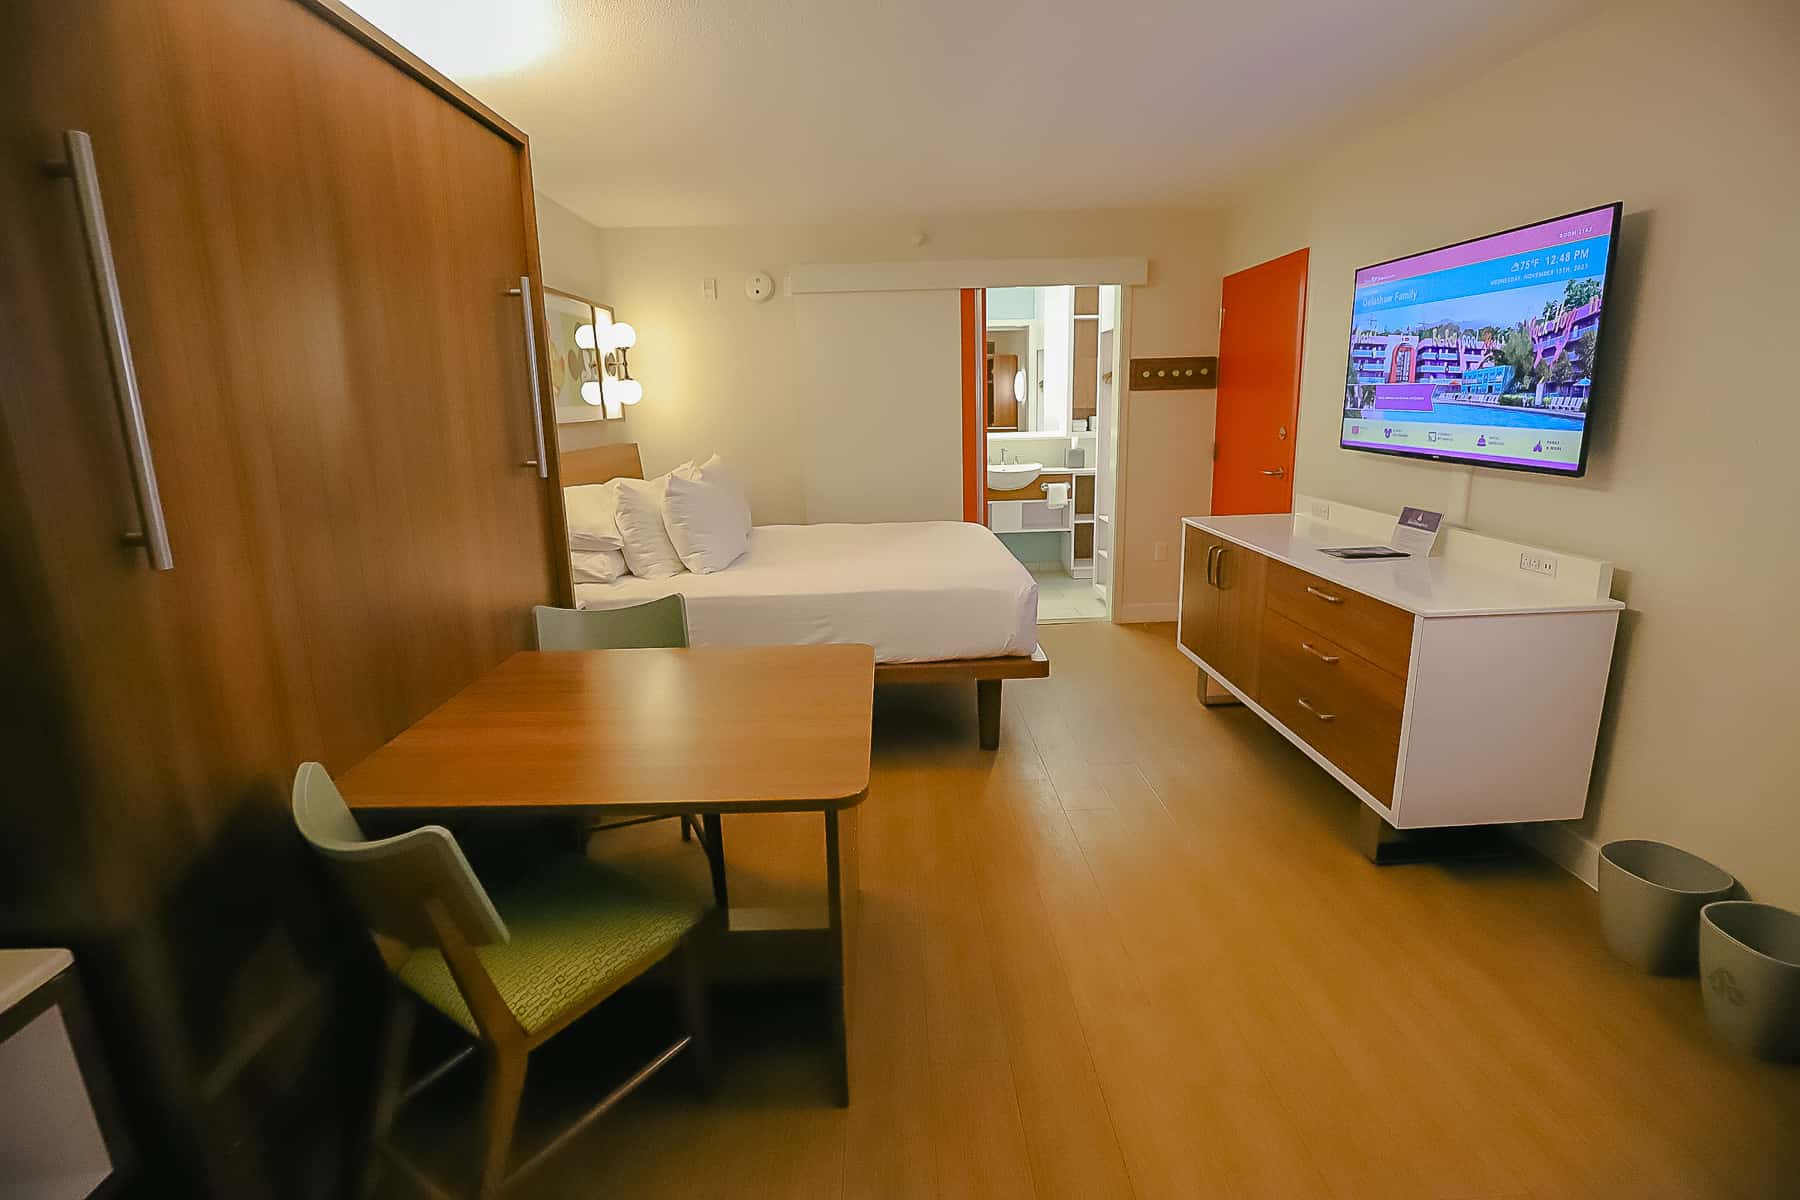 a view of the room layout at Pop Century when you first arrive 